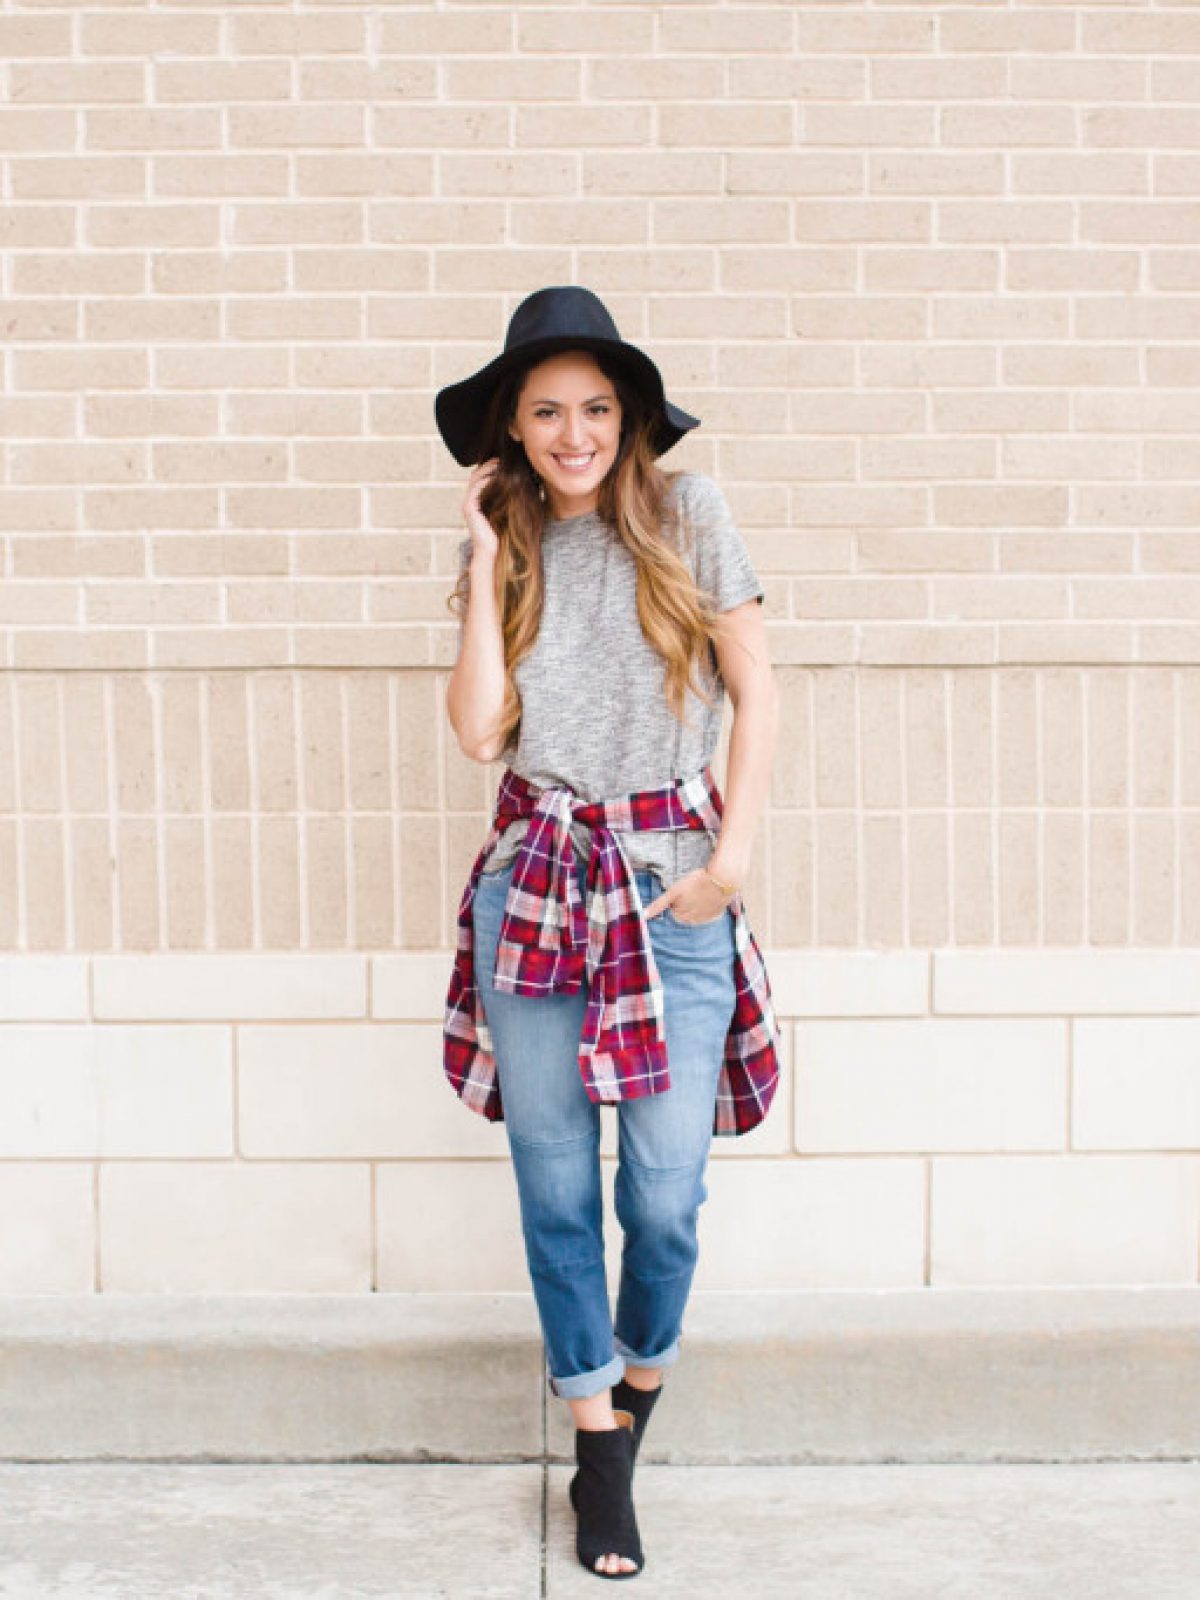 old navy style, patchwork denim, plaid flannel, Old Navy Boyfriend Plaid Flannel Shirt in Purple Plaid, Old Navy Women's Boyfriend Skinny Ankle jeans ABERDEEN, Old Navy Women's Wool Felt Fedora in Black, summer to fall transition outfit ideas, early fall outfit ideas, fall in the south